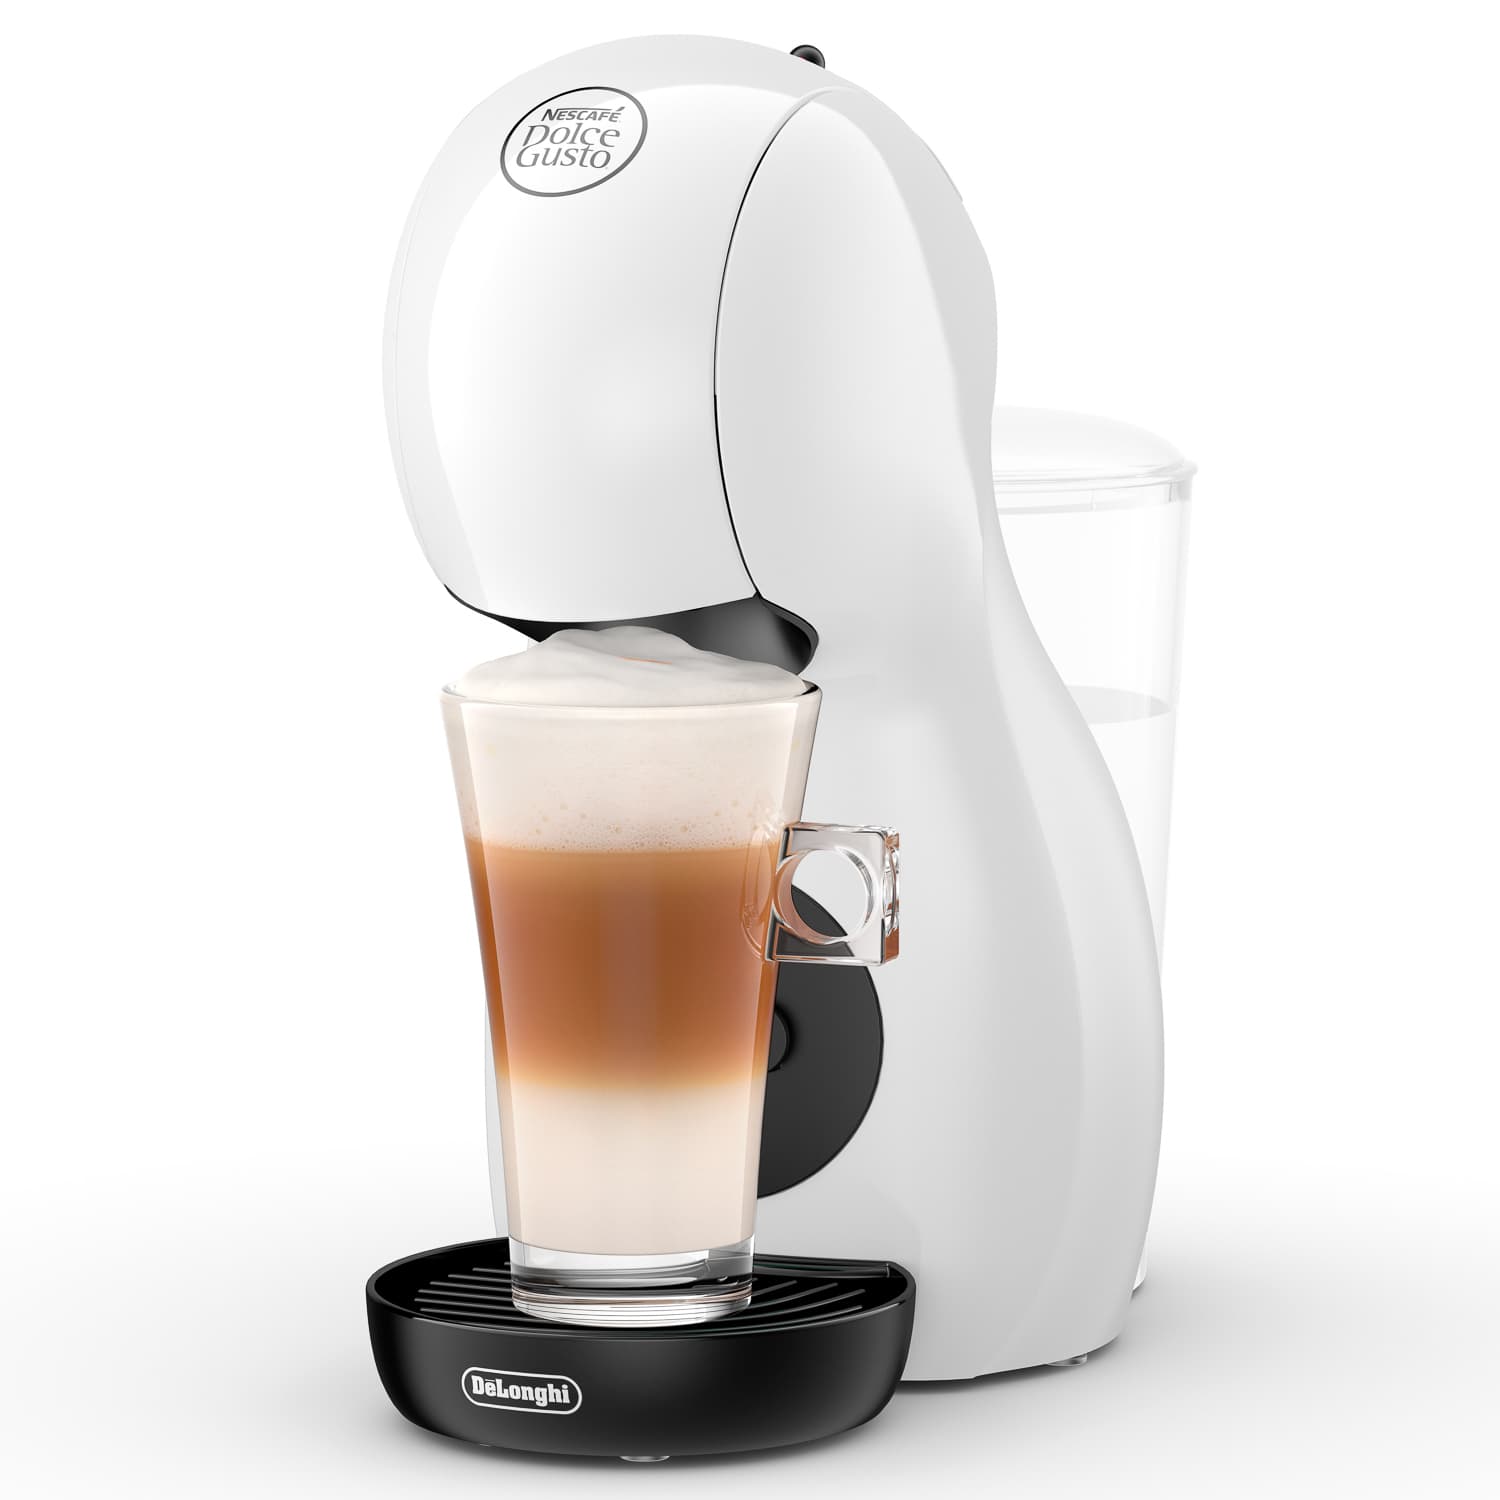 The Nescafe Dolce Gusto Piccolo XS coffee machine is now £35 at B&M